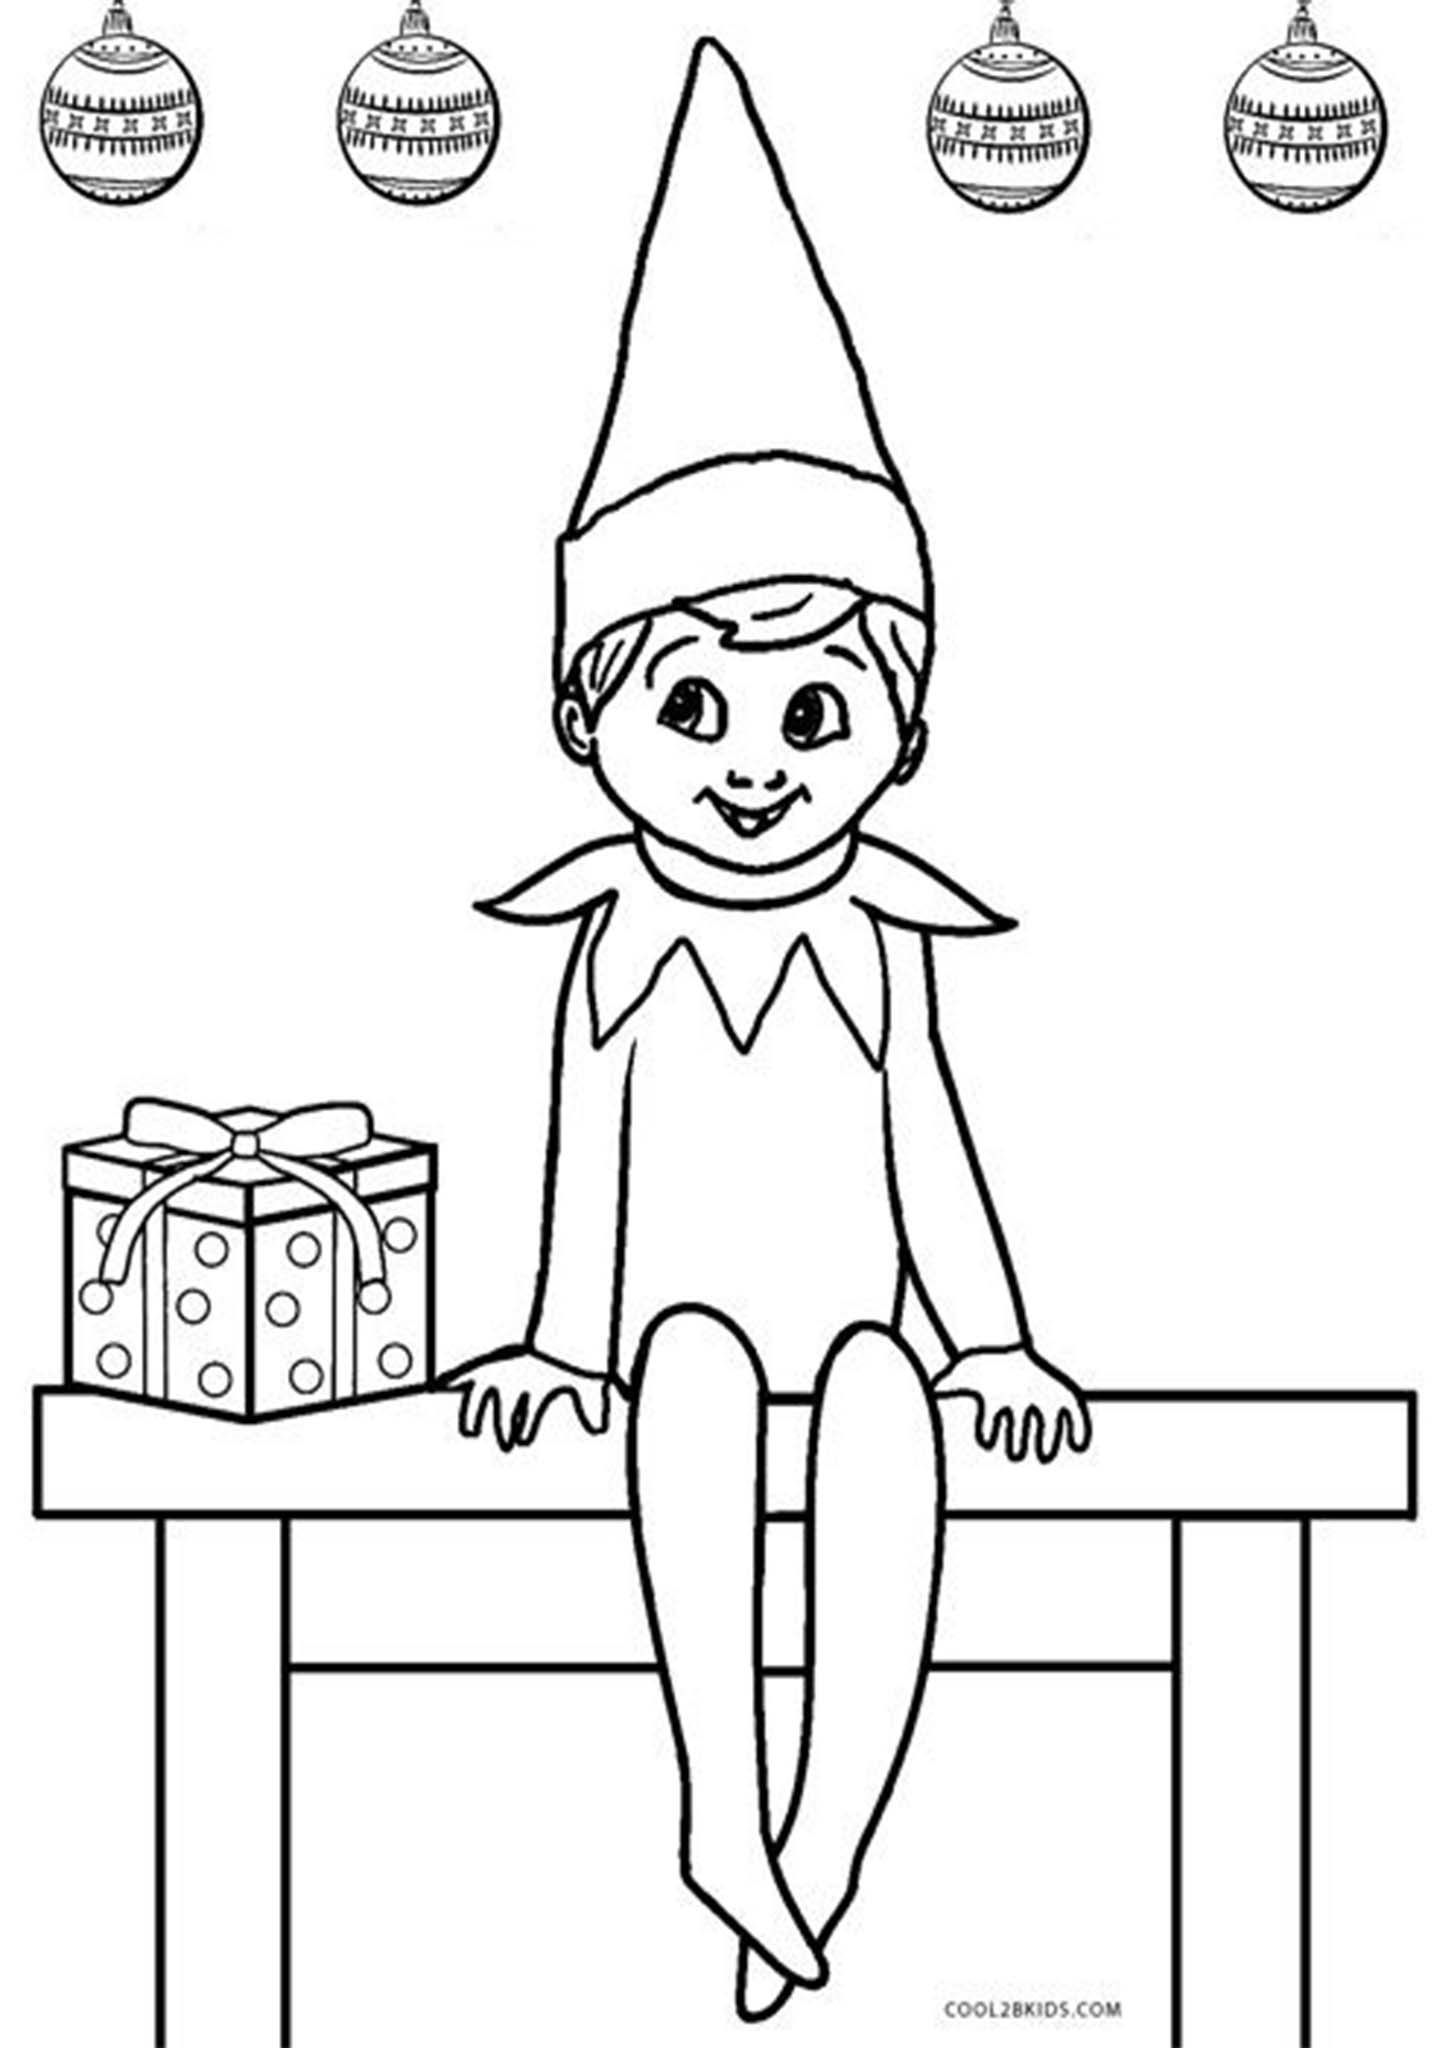 Free Printable Elf on The Shelf Coloring Pages | Printable christmas coloring  pages, Christmas coloring sheets, Christmas coloring pages